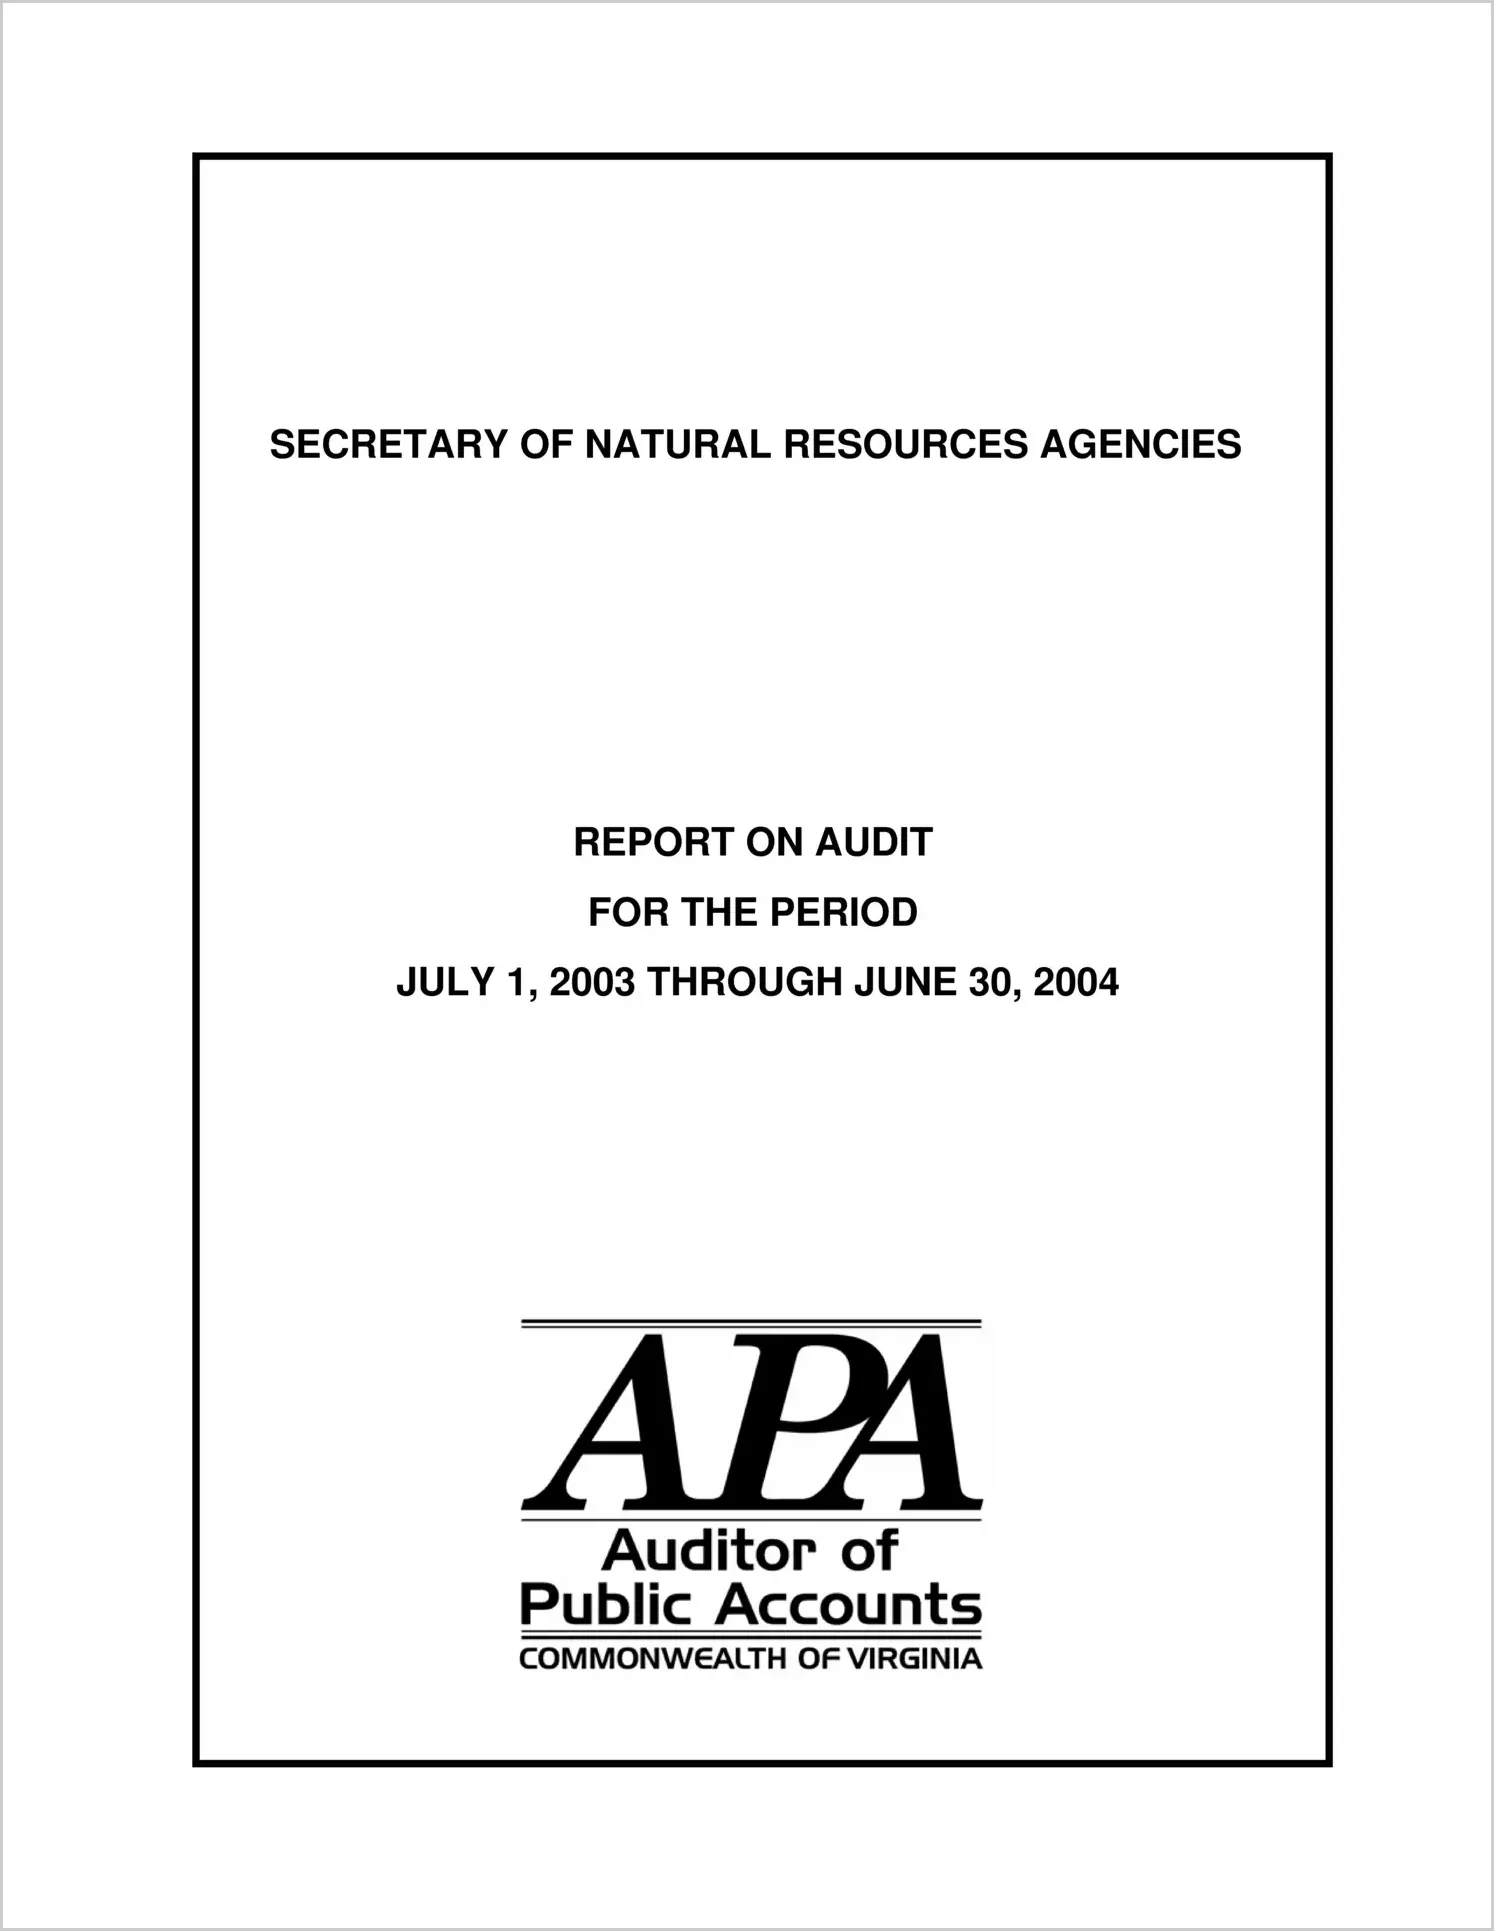 Secretary of Natural Resources Agencies for the period July 1, 2003 through June 30, 2004